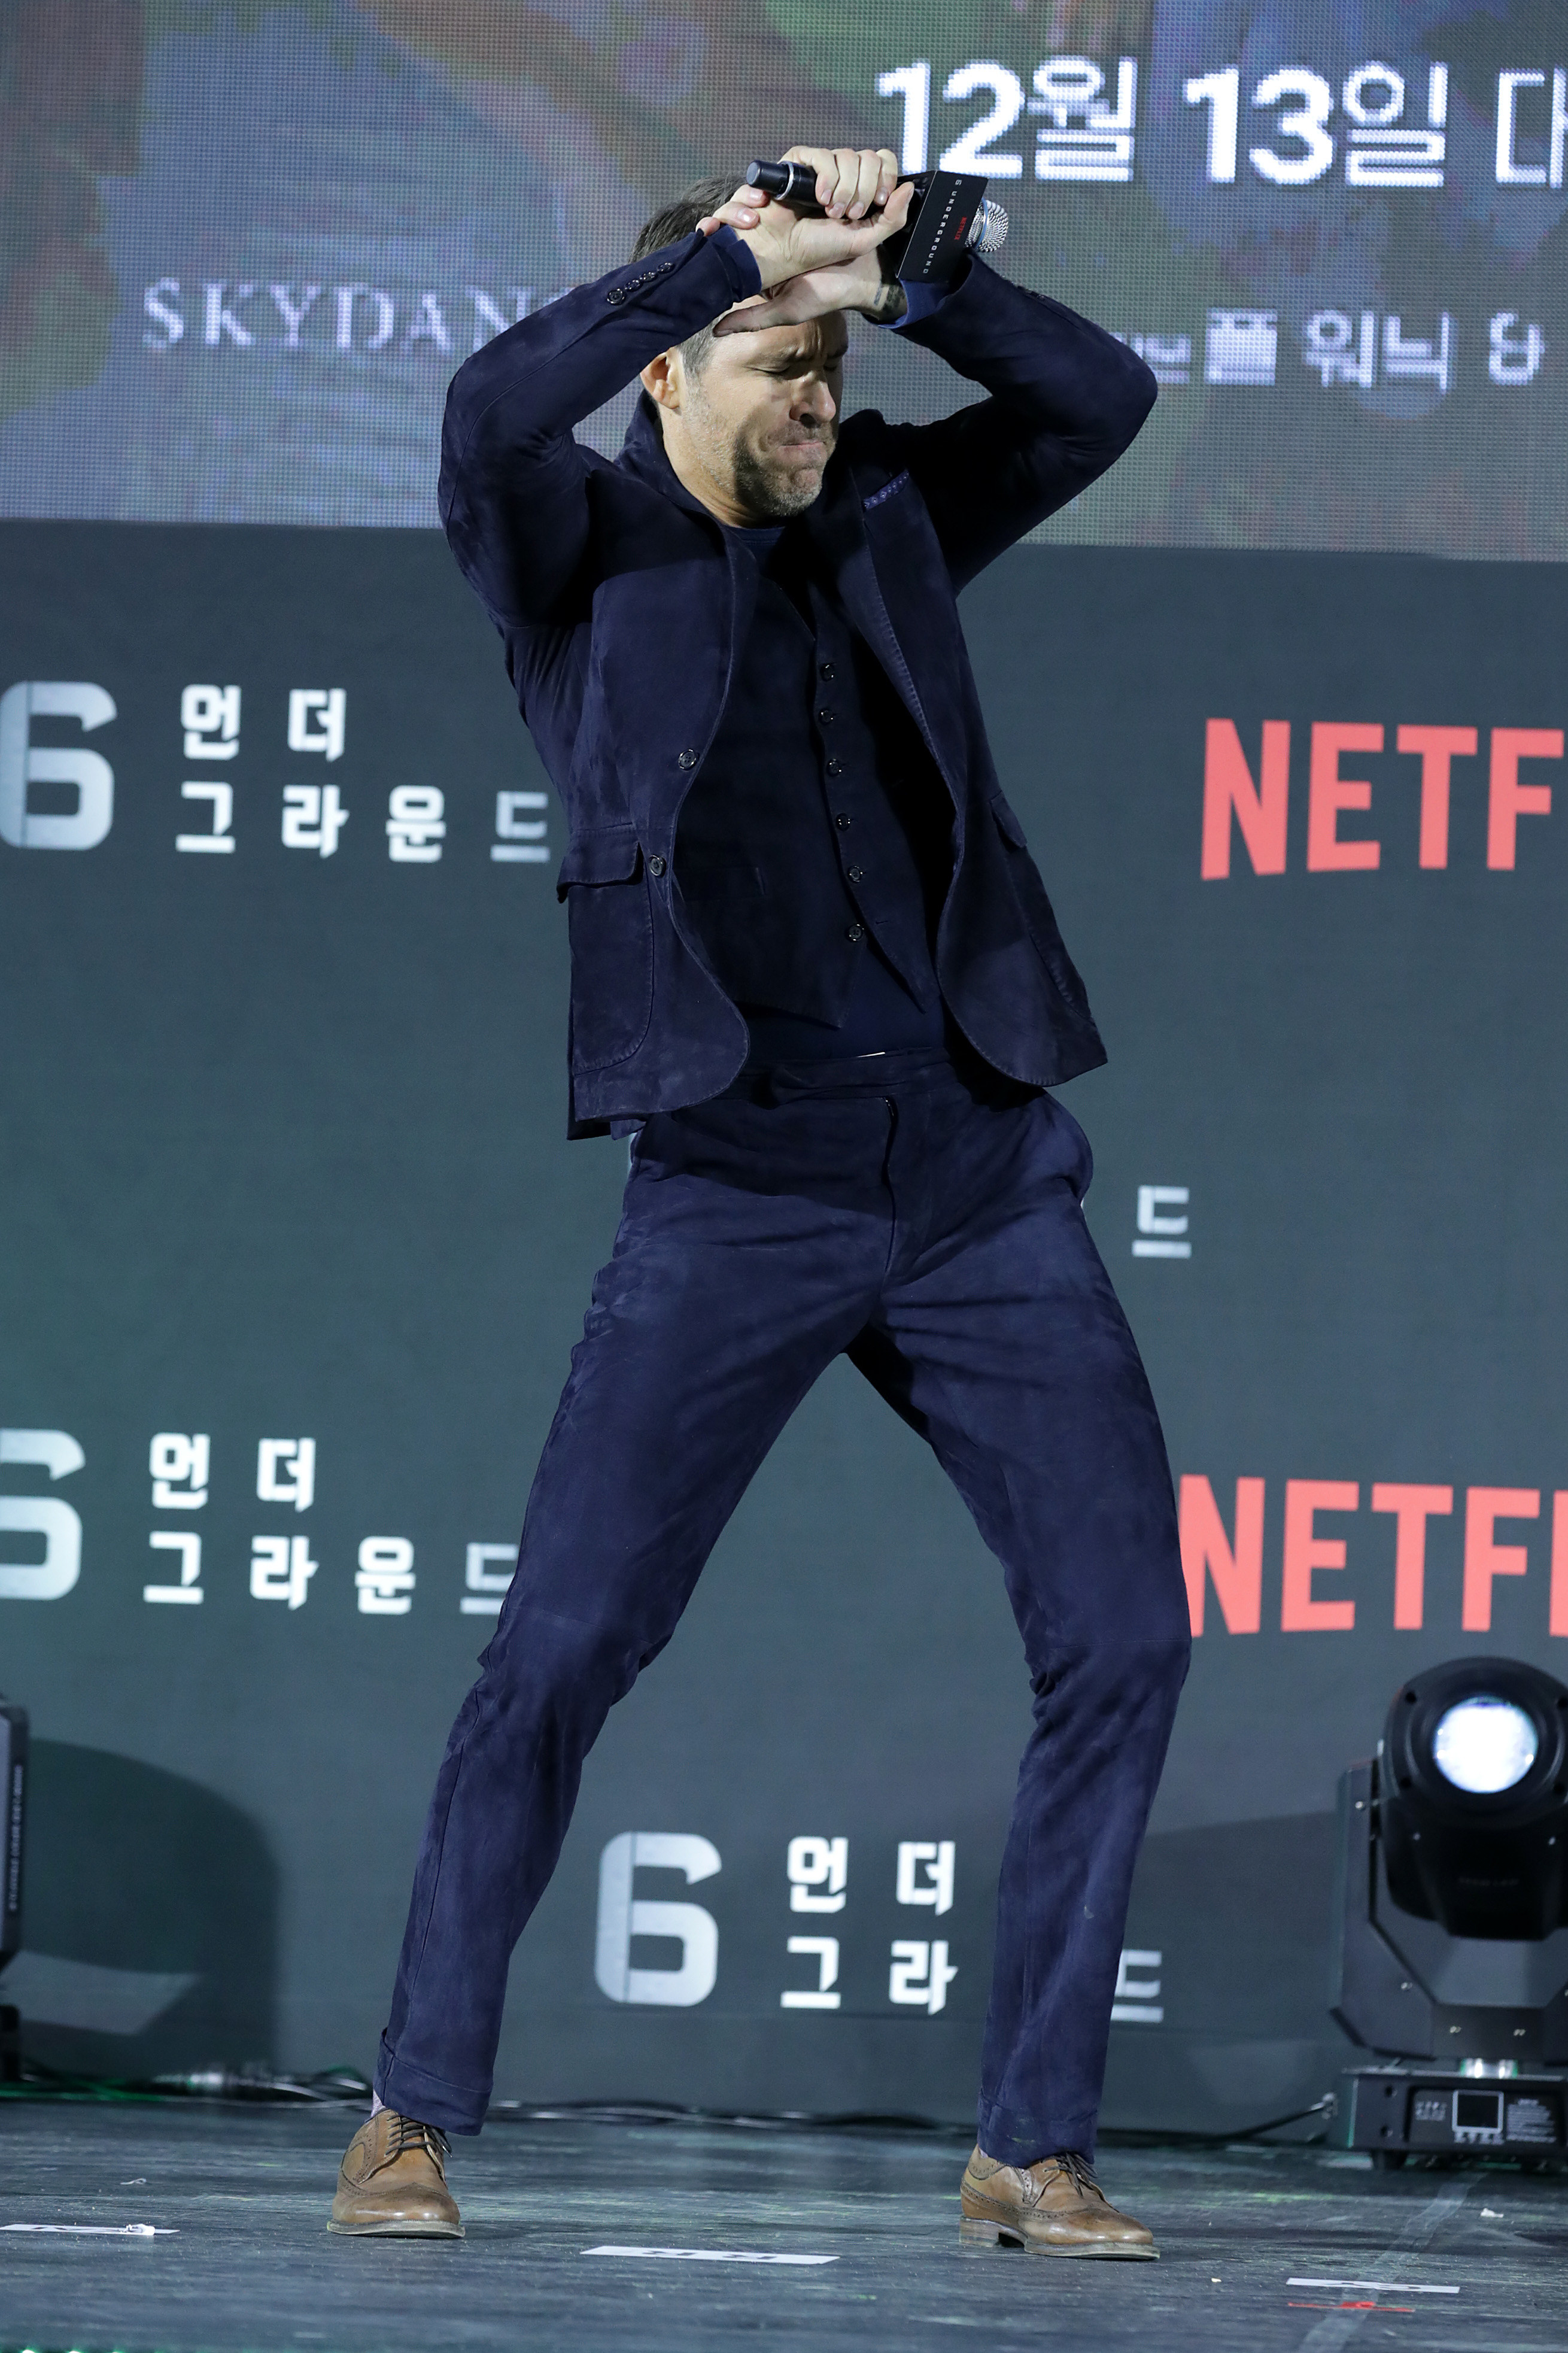 A man dancing on stage